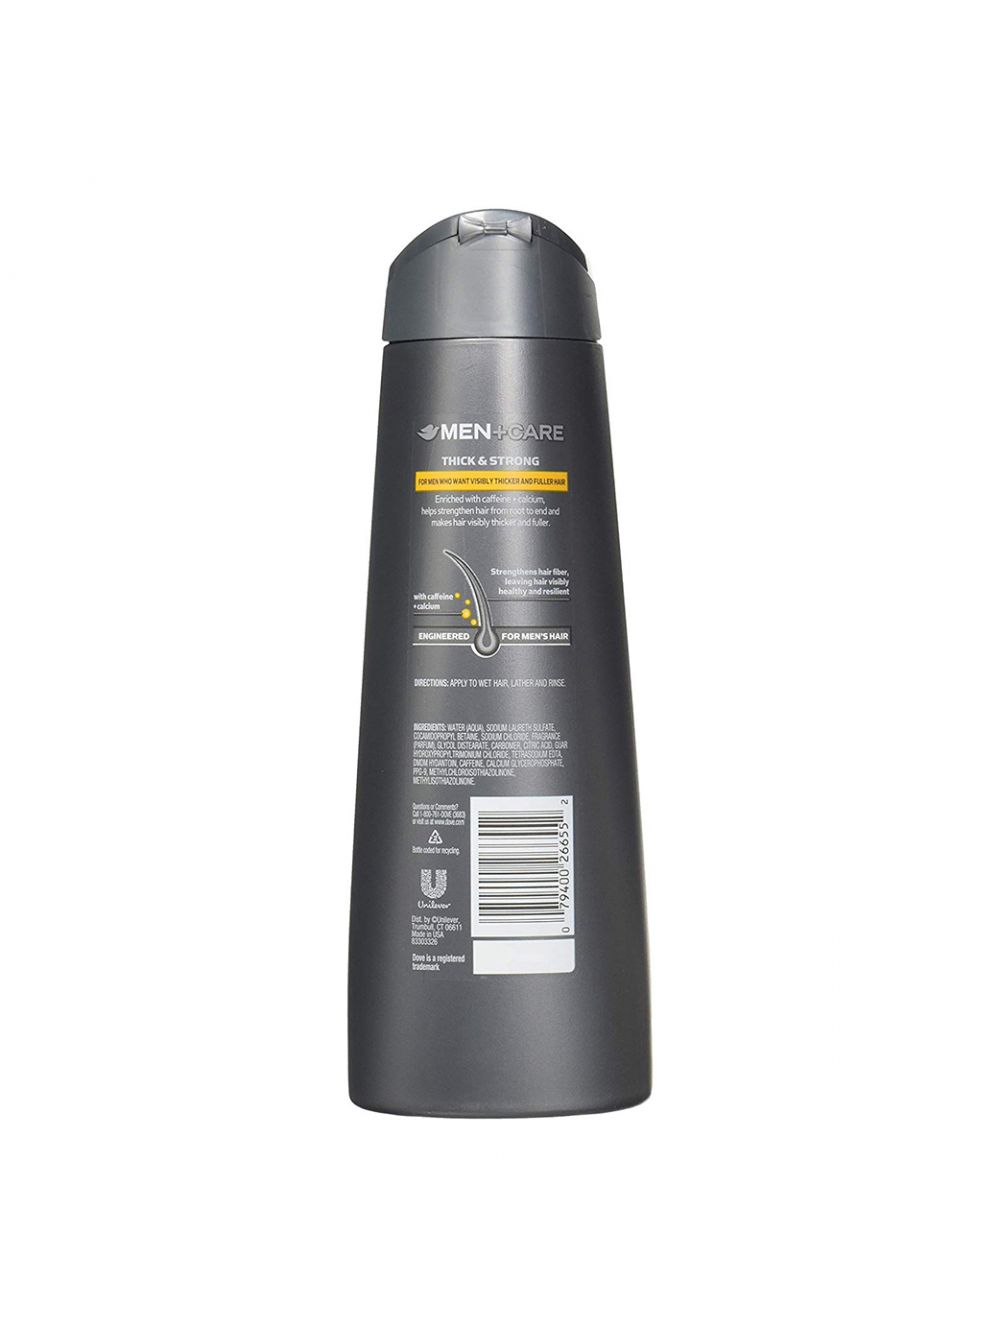 Dove Men +care Thick And Strong Fortifying 2in1 Shampoo + Conditioner (355ml) - Niram